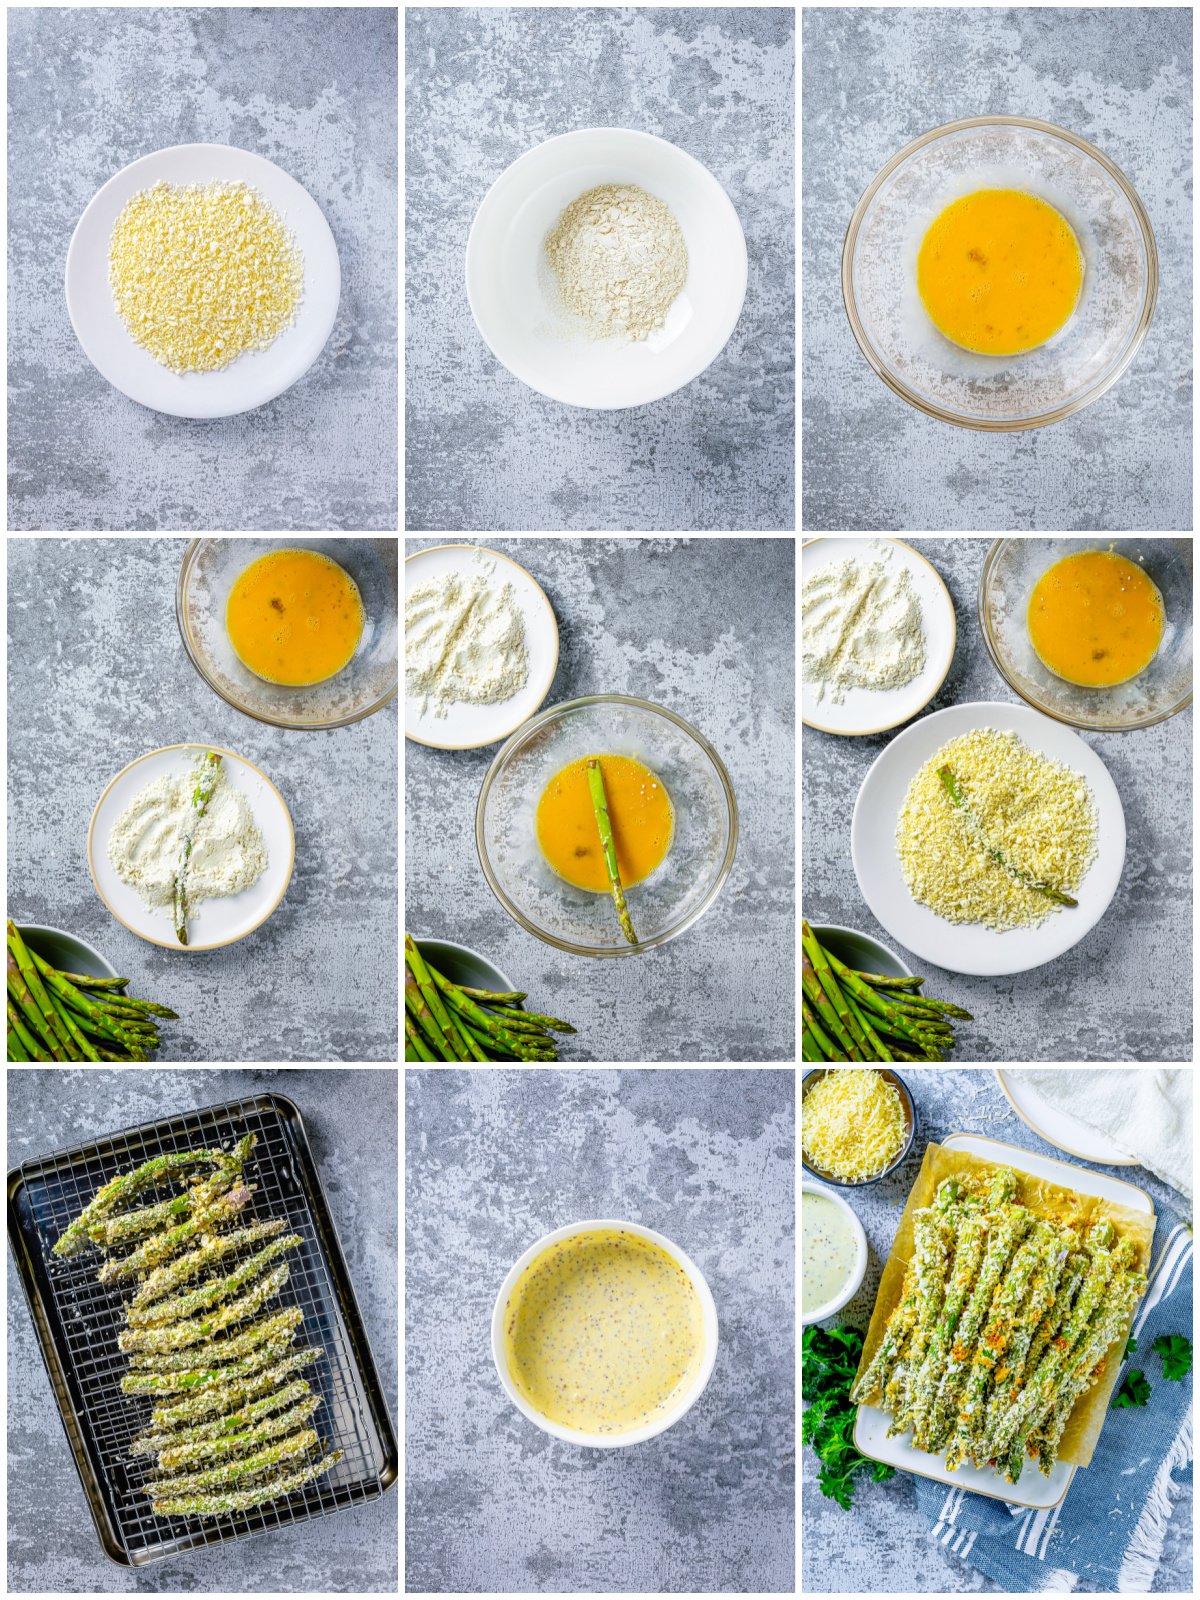 Step by step photos on how to make Baked Asparagus Fries.